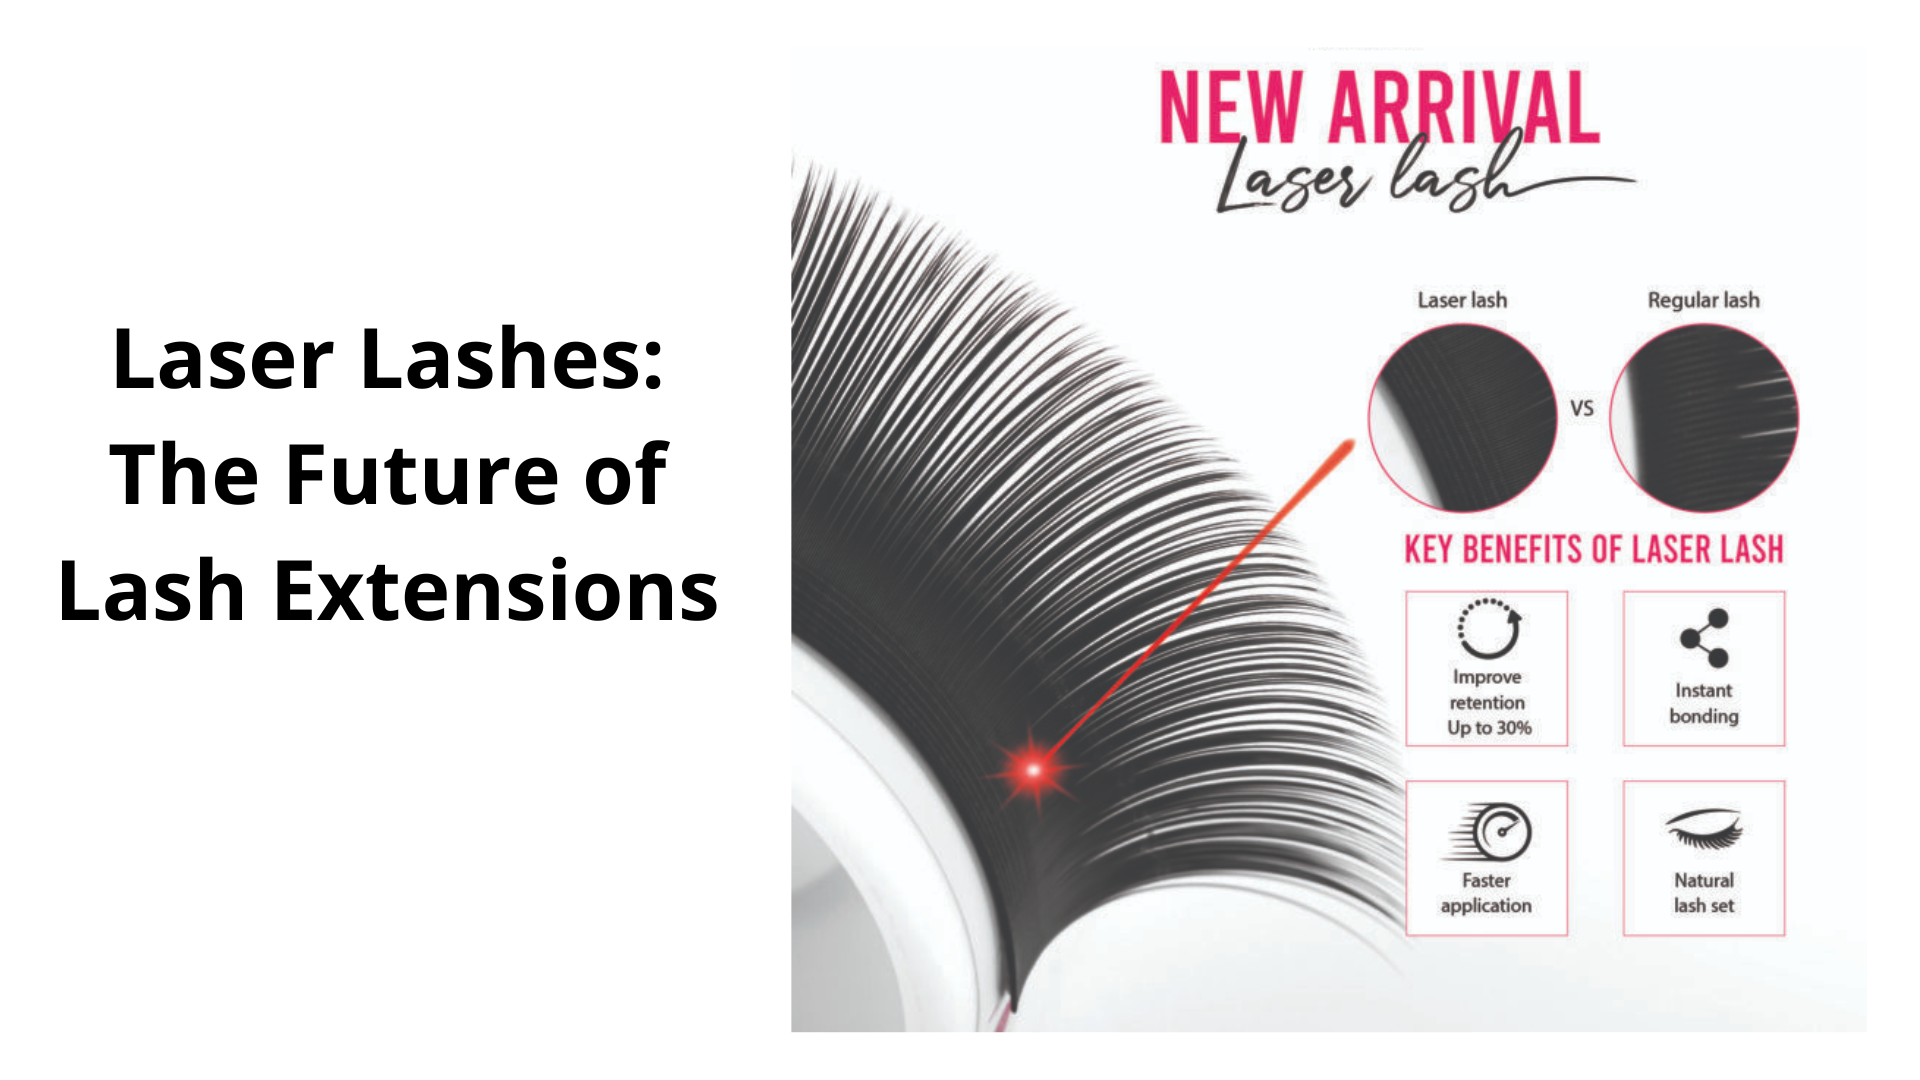 Laser Lashes: The Future of Lash Extensions